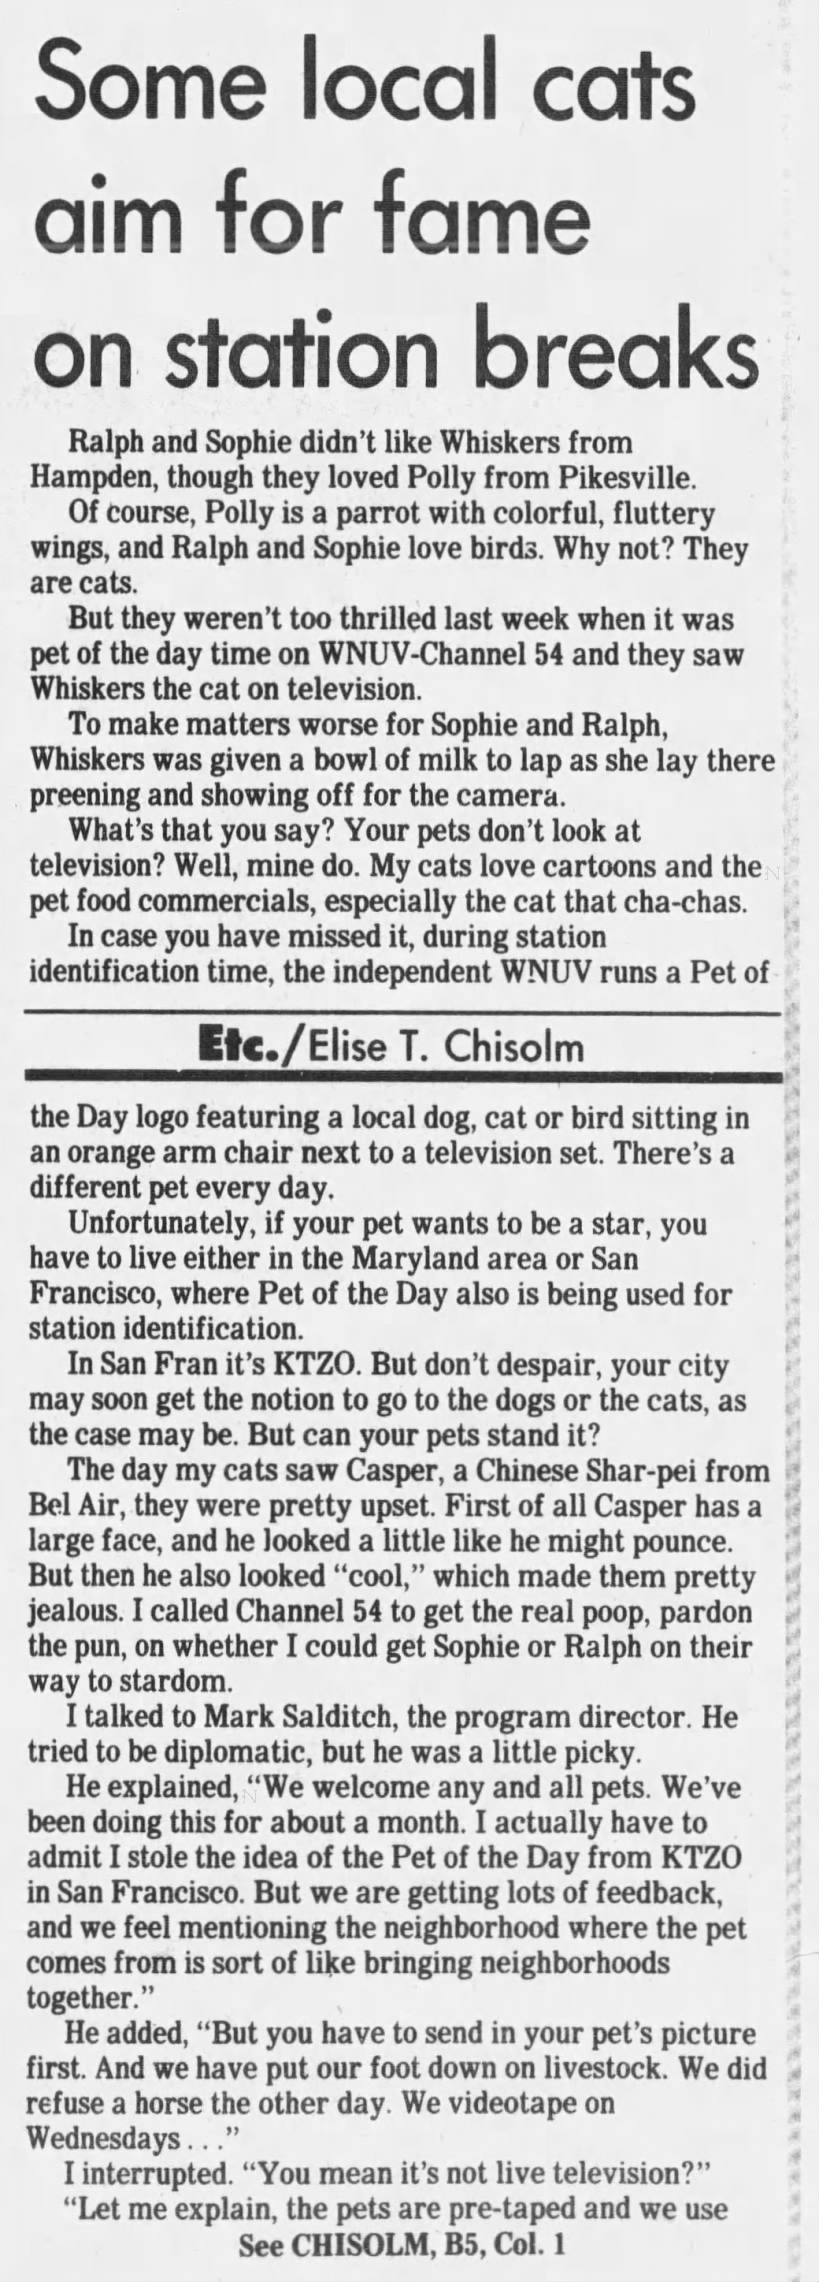 Some local cats aim for fame on station breaks